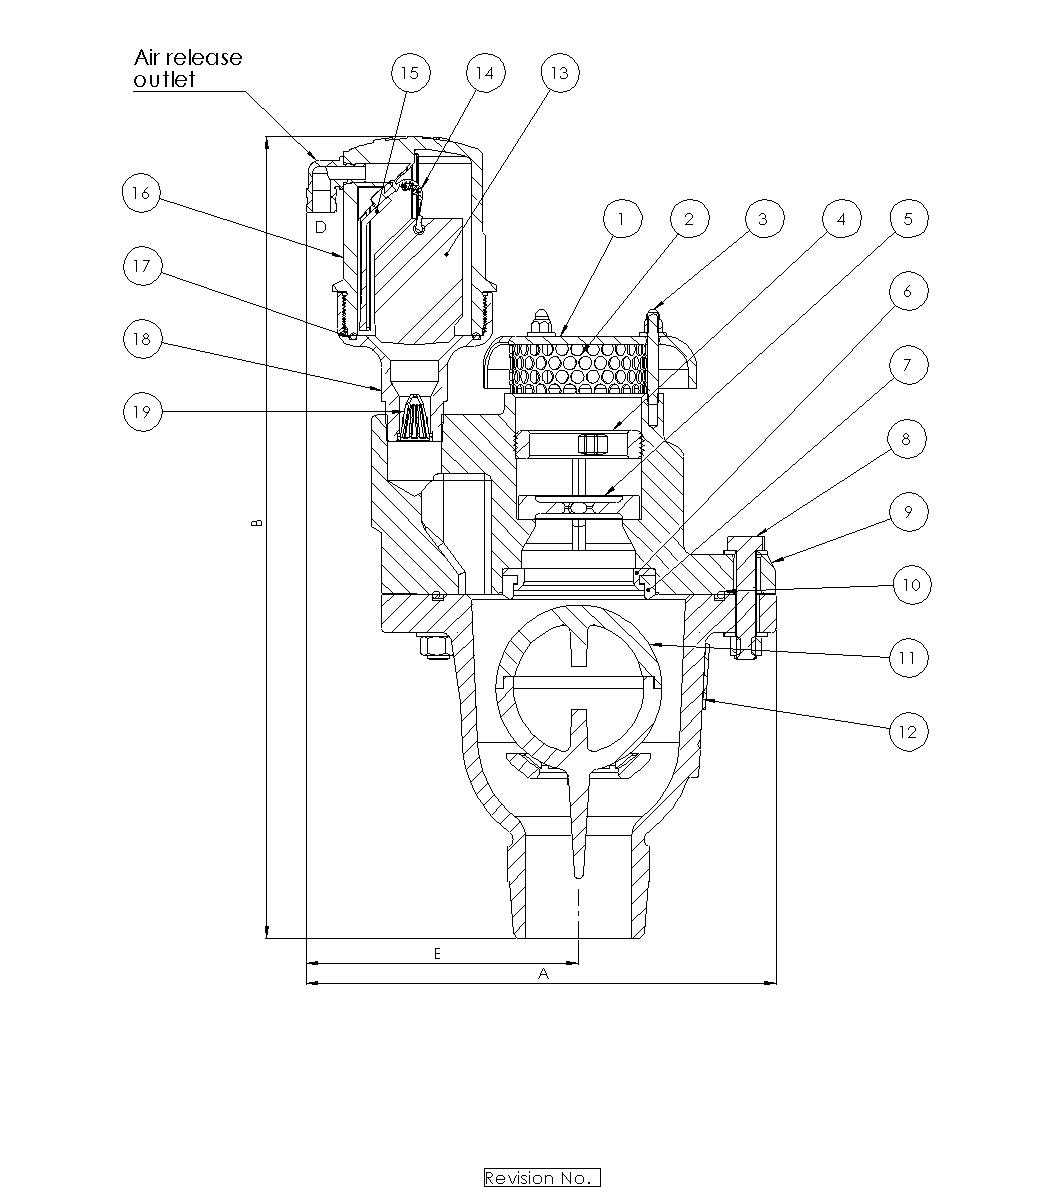 D-060  Combination Air Valve for Industry